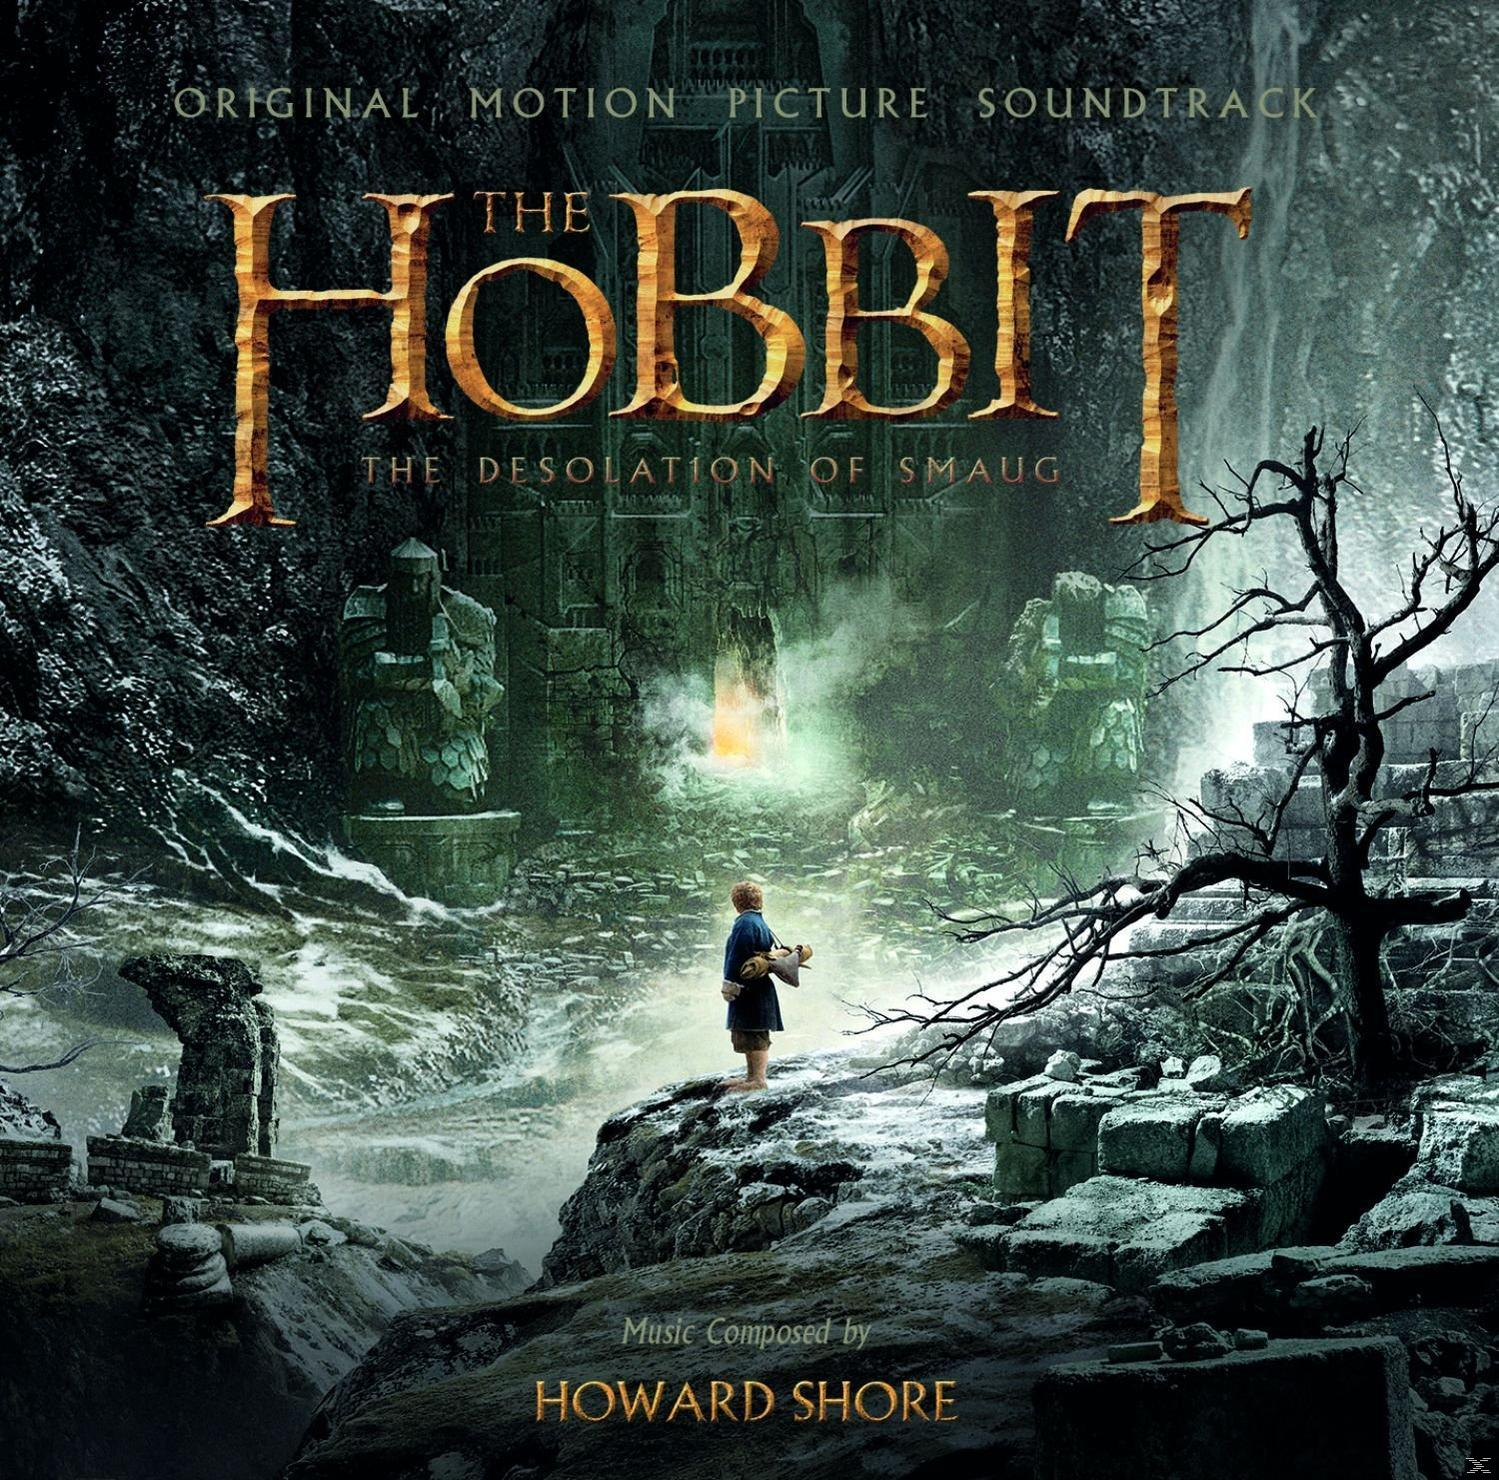 Various - The Of Desolation Hobbit-The - (CD) Smaug